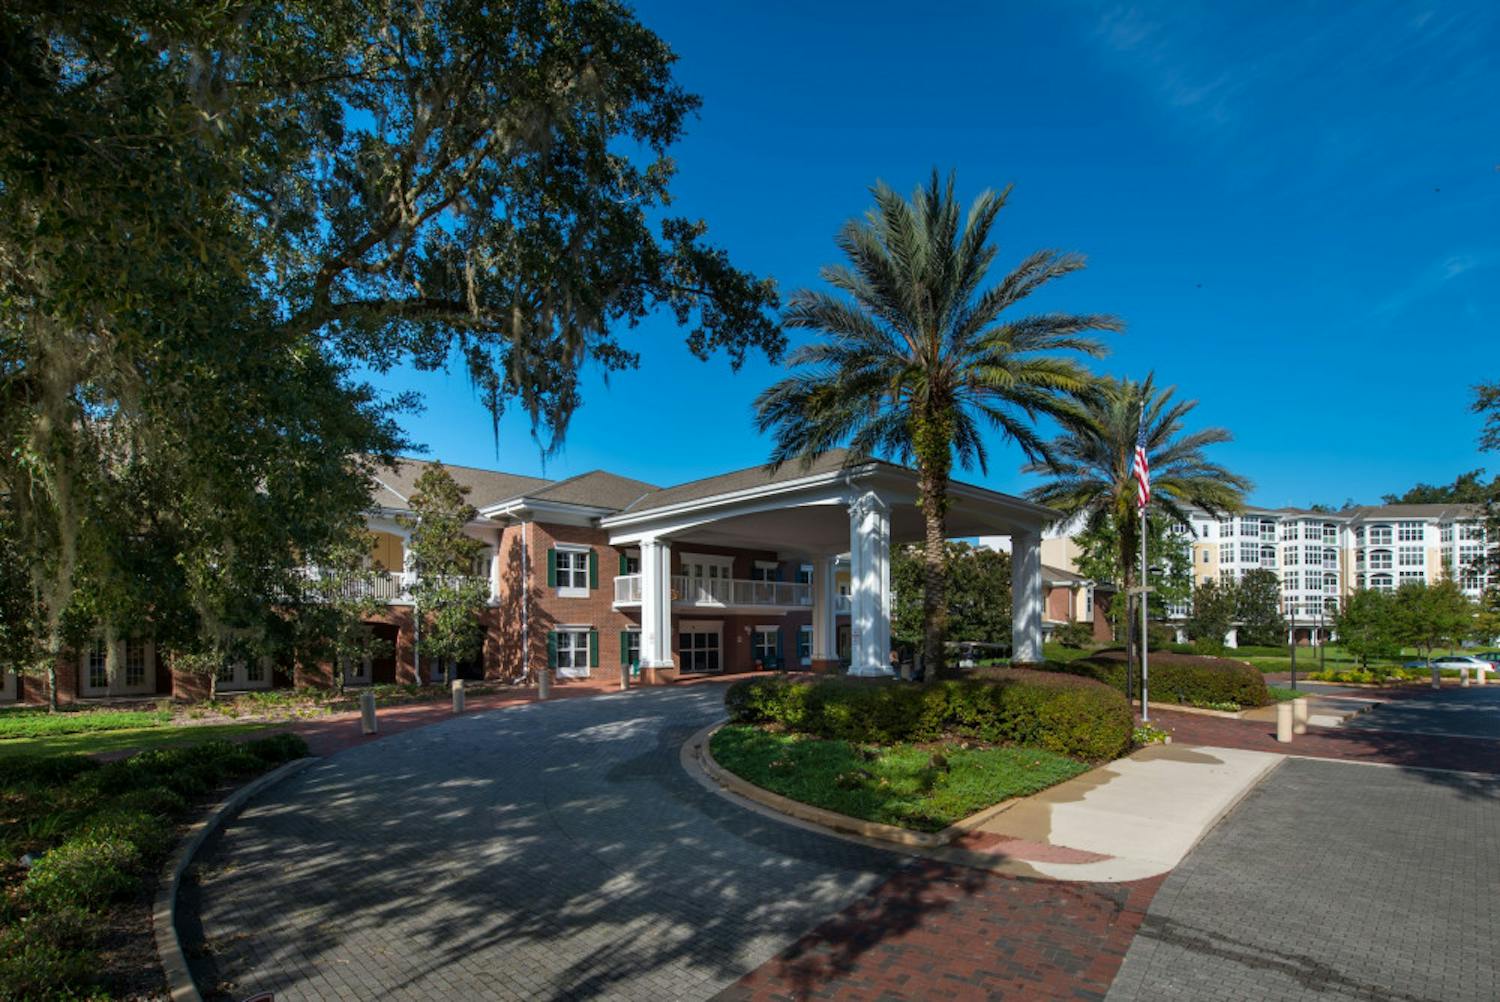 Oak Hammock at the University of Florida, a retirement community located at 5100 SW 25th Blvd., confirmed six residents and six staff as positive COVID-19 cases. 